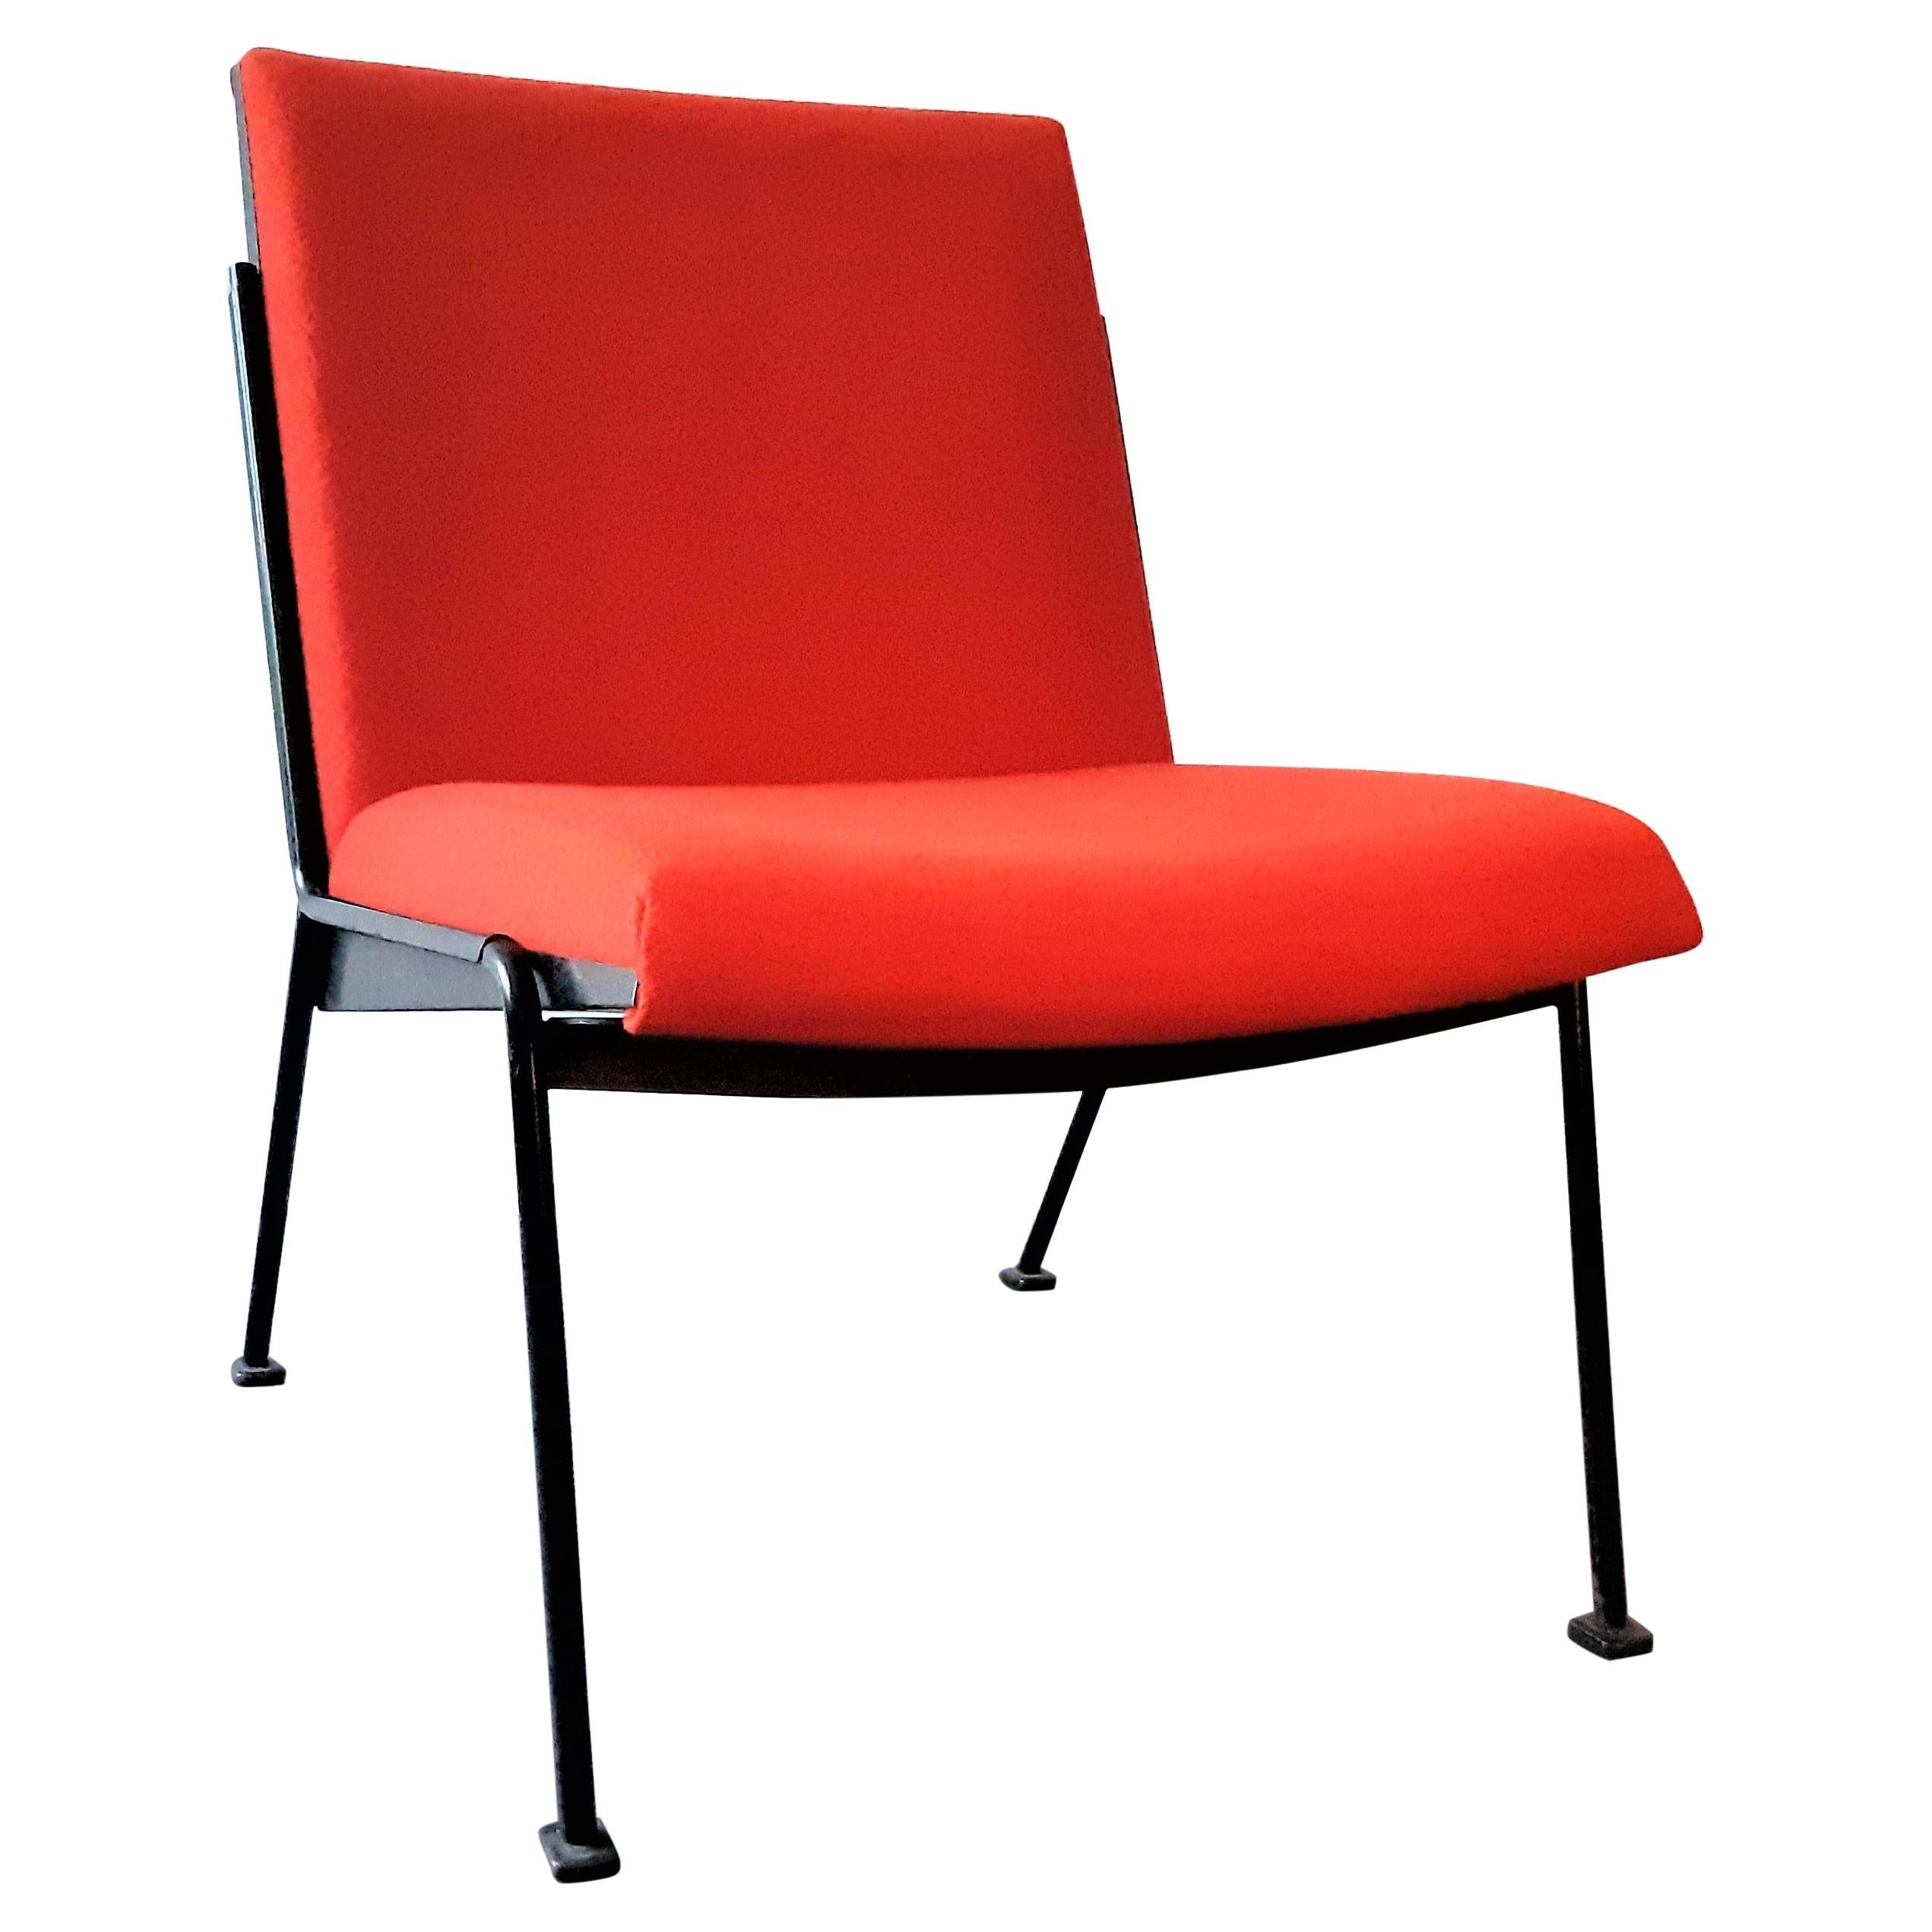 Red 'Oase' Lounge Chair by Wim Rietveld for Ahrend de Cirkel, 1950's For Sale